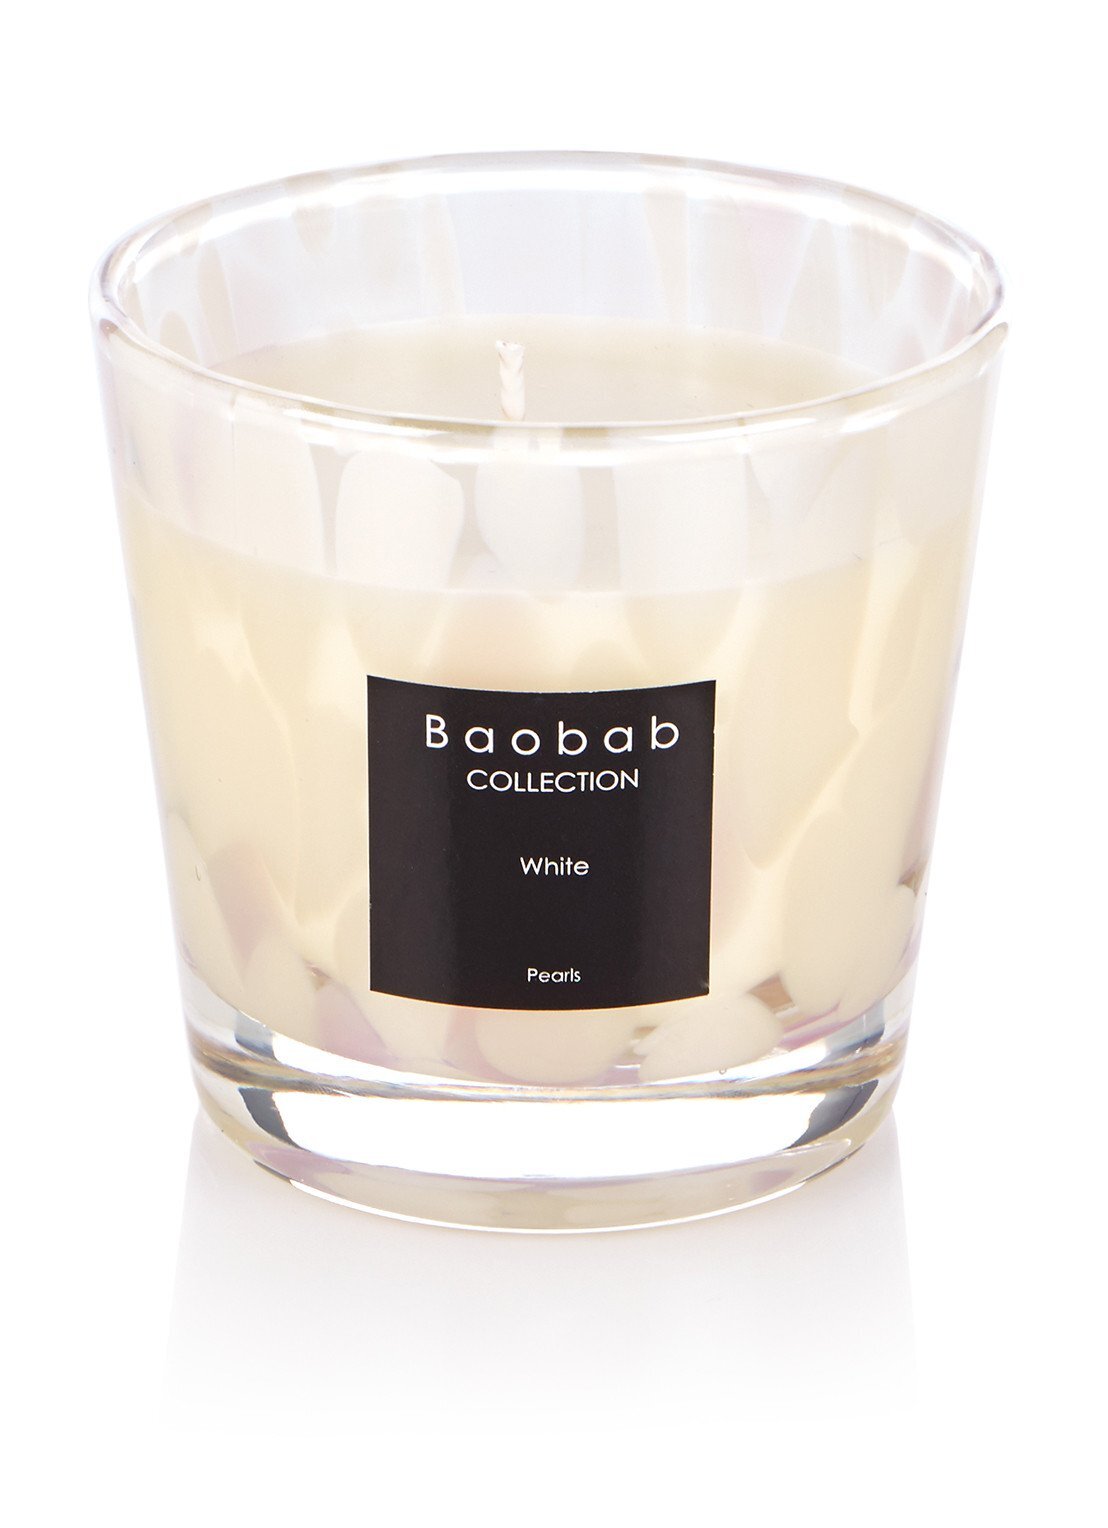 Baobab Collection White Pearls geurkaars